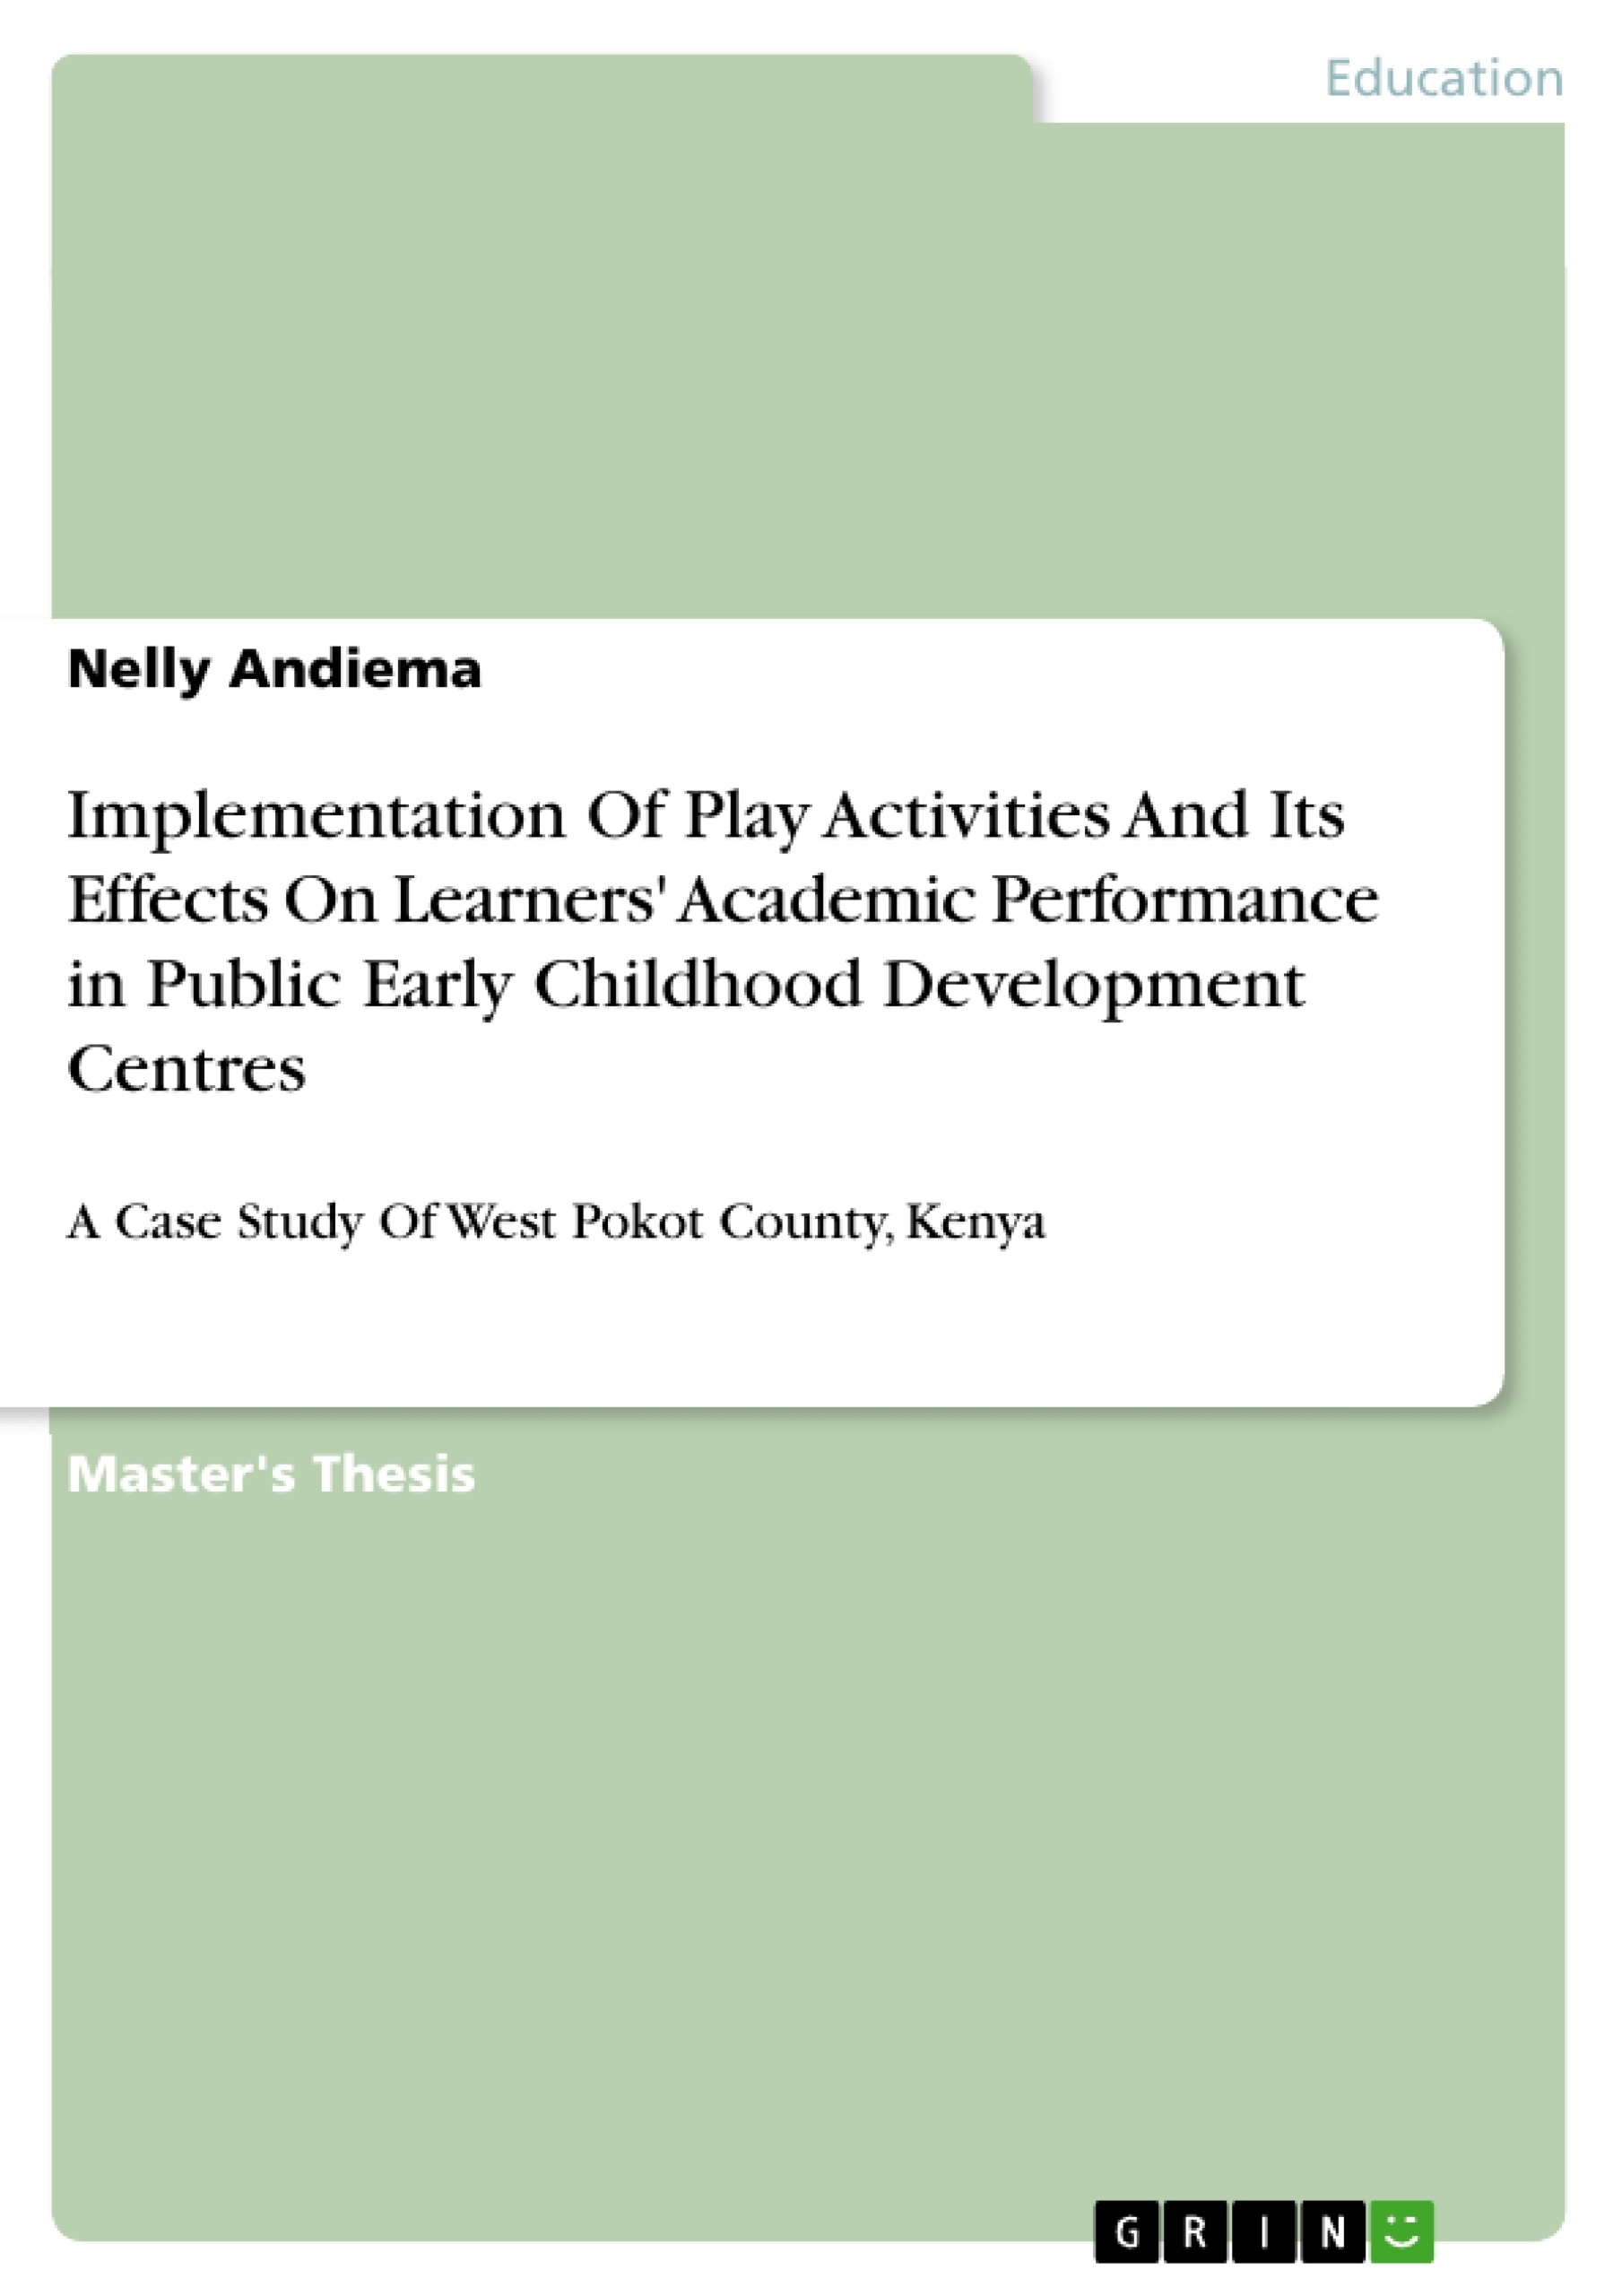 Titre: Implementation Of Play Activities And Its Effects On Learners' Academic Performance in Public Early Childhood Development Centres